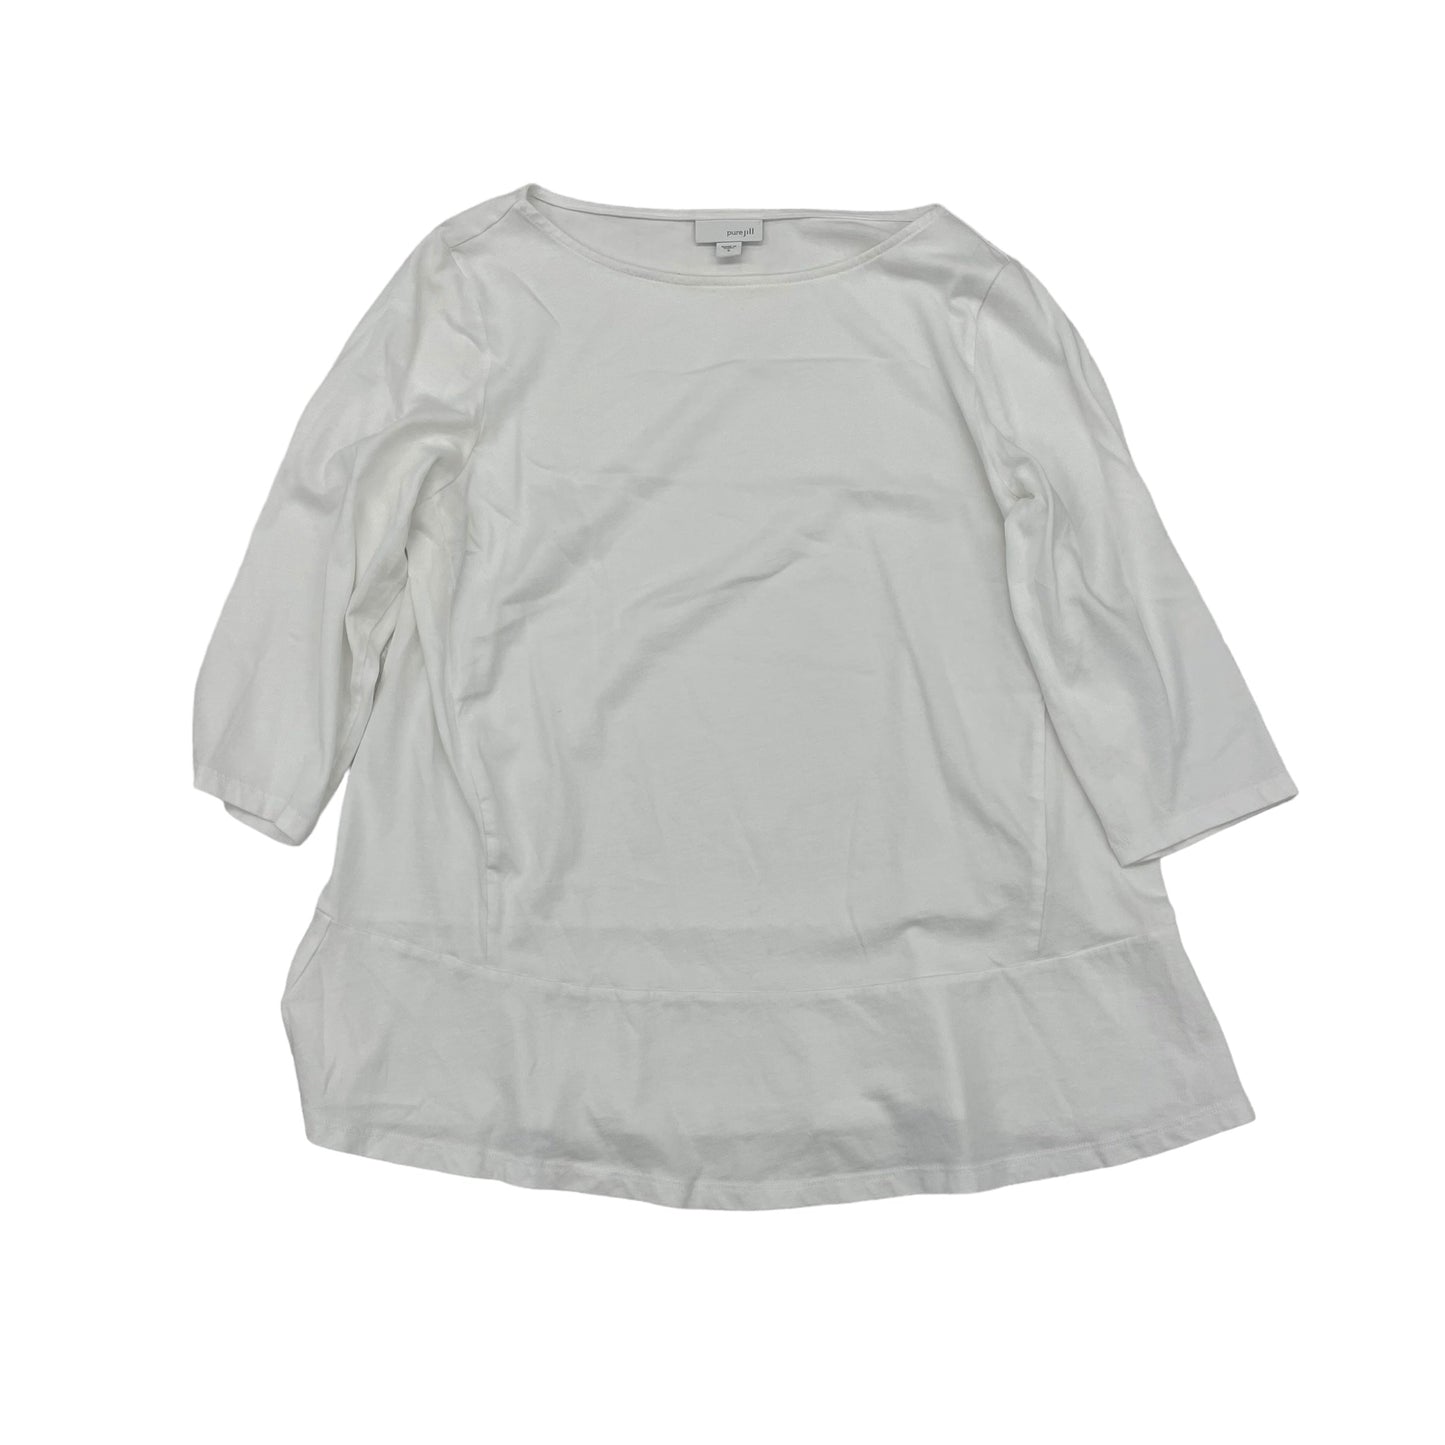 WHITE TOP 3/4 SLEEVE by PURE JILL Size:S